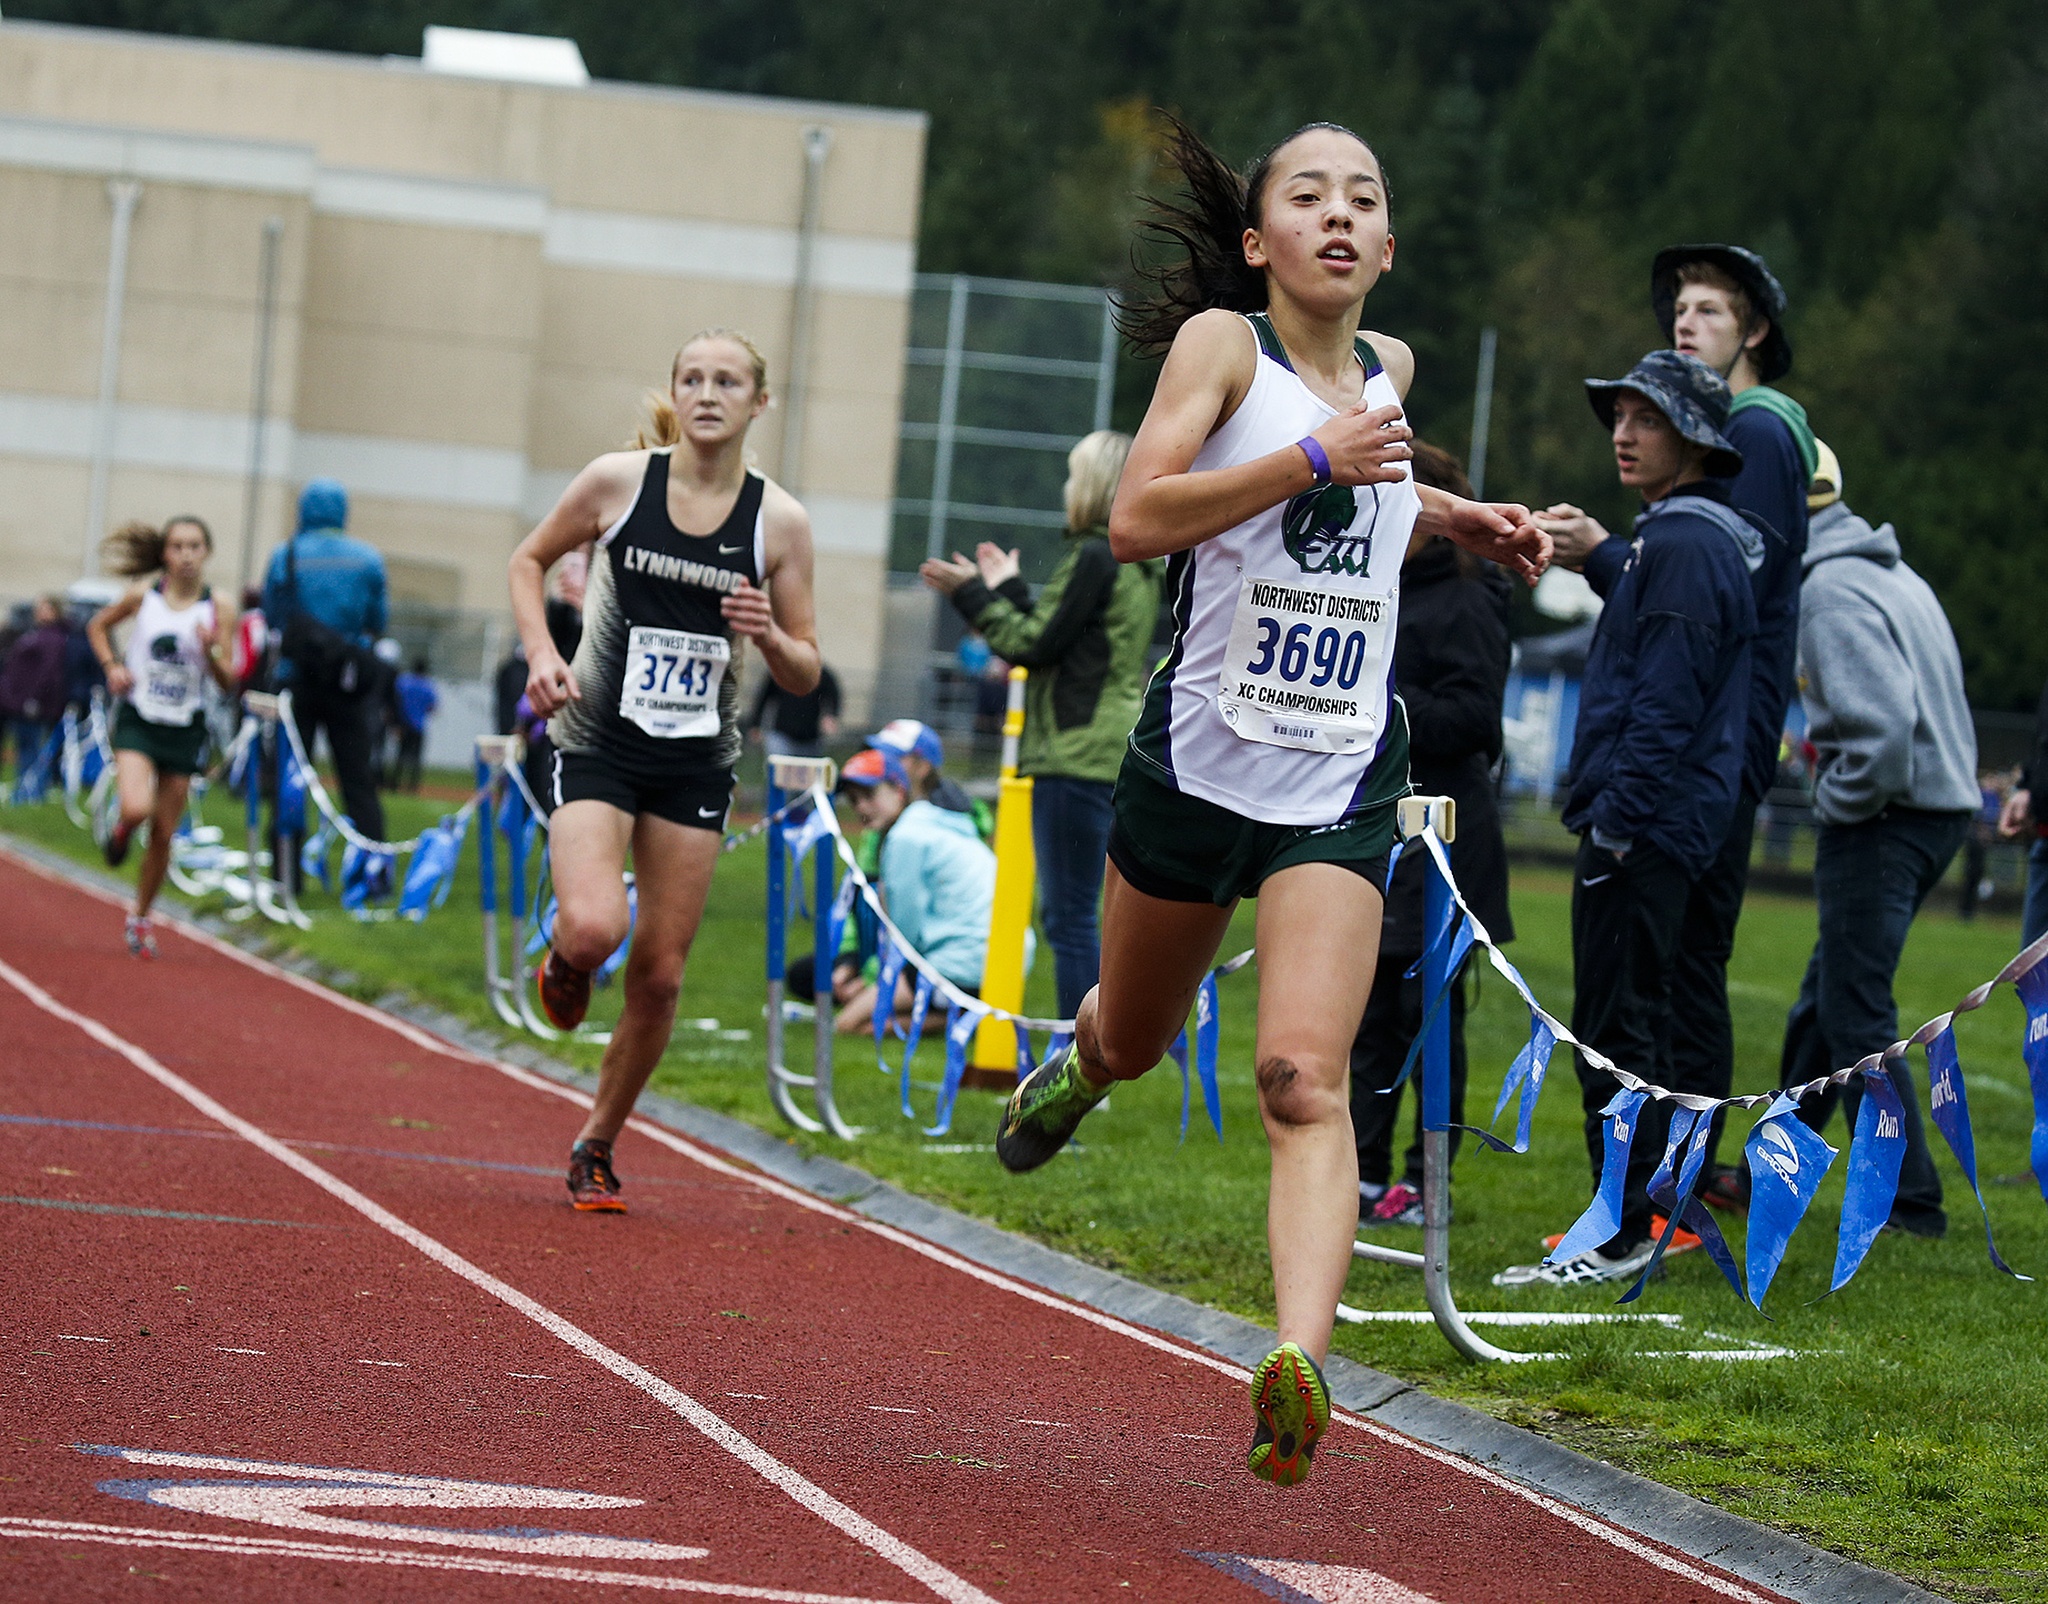 Edmonds-Woodway’s Yukino Parle (right) crosses the line to win the girls 3A District 1 cross country meet at South Whidbey High School on Saturday. Parle fell late in the race, but got up and still claimedvictory on the muddy and hilly course on Whidbey Island. (Ian Terry / The Herald)